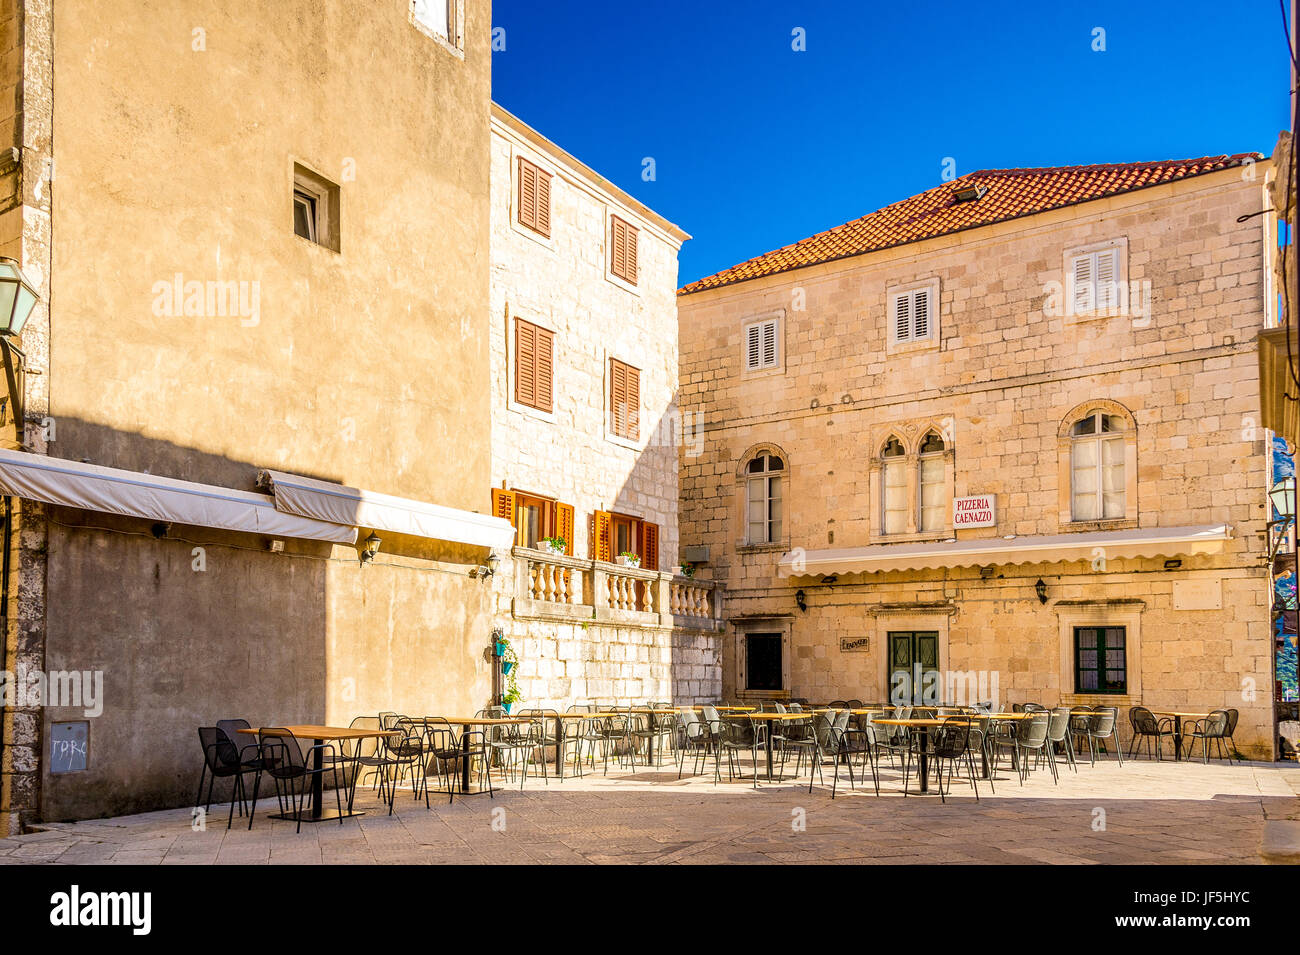 St Mark’s Square (Trg Svetog Marka) is the main square in Korcula Old Town, popular with locals and visitors alike. Stock Photo